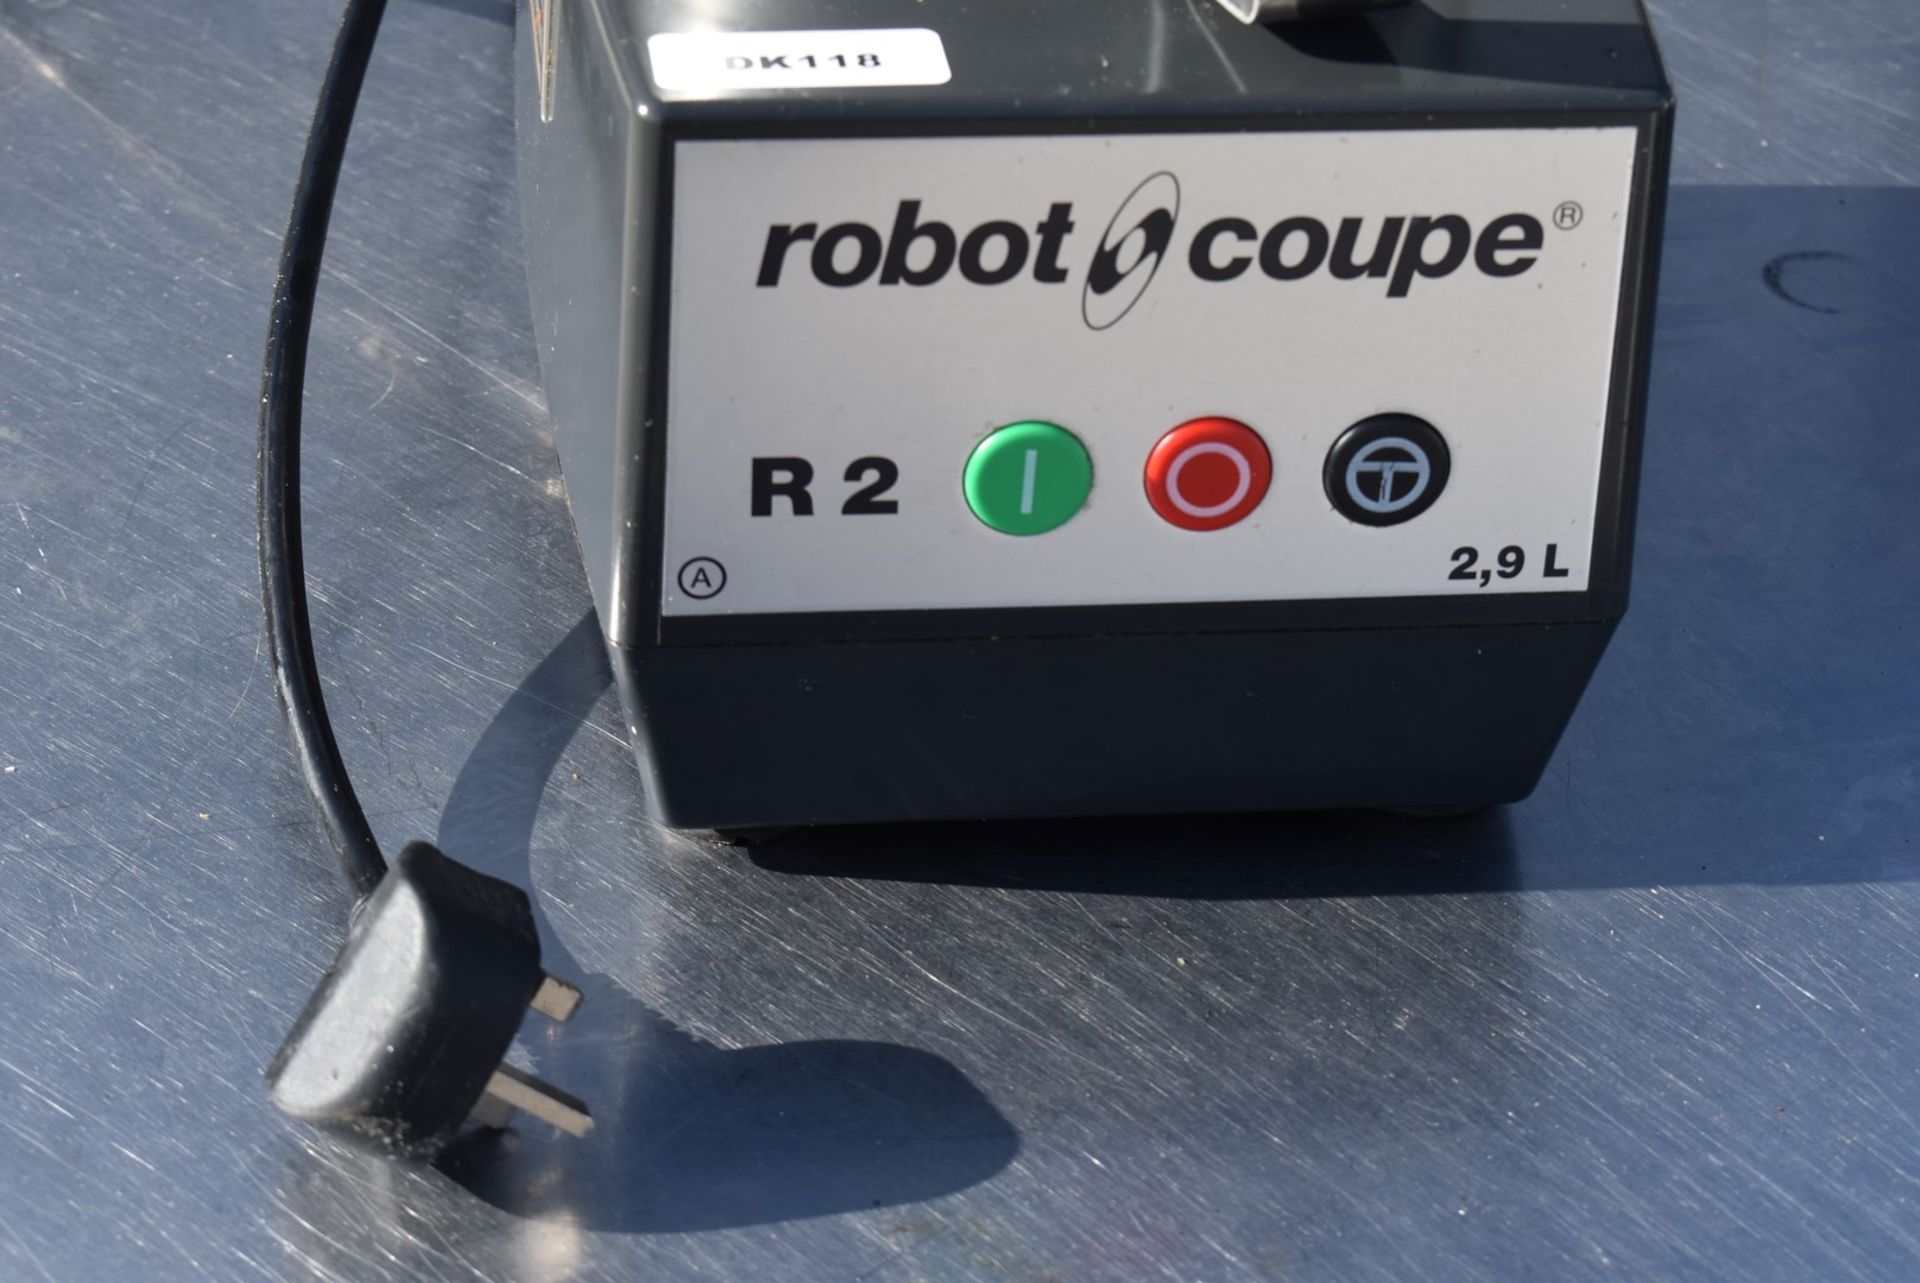 1 x Robot Coupe R2 Heavy Duty Cutter Blender - Recently Removed From a Dark Kitchen Environment - Image 4 of 9